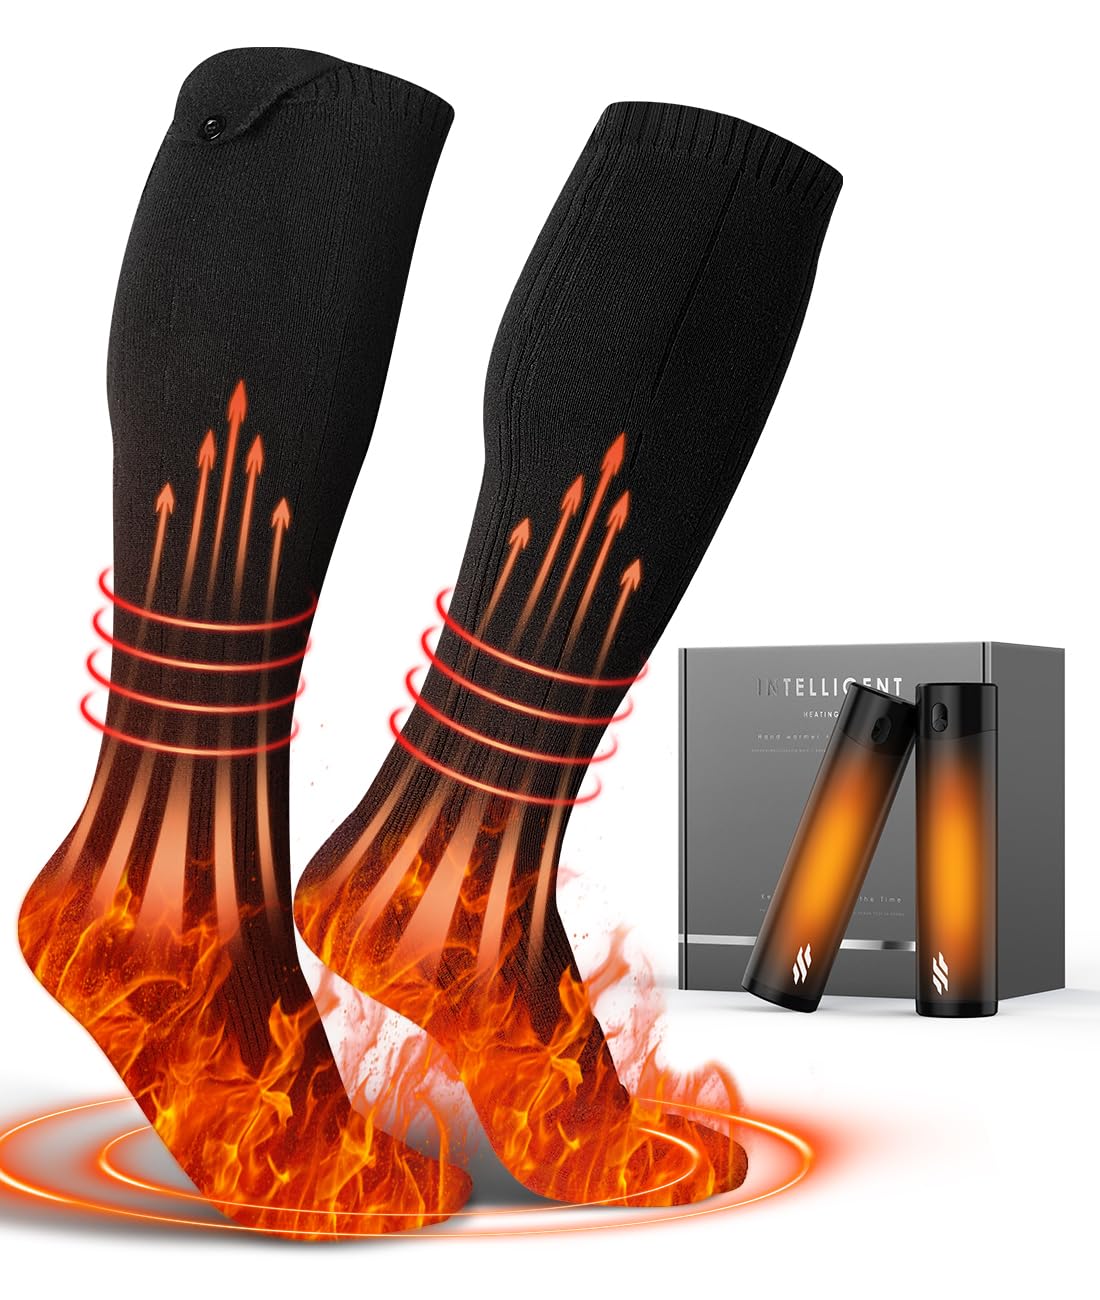 Heated Socks and Hand Warmers for Men Women - 2 Packs 6000mAh 7.5V Electric Foot Warmers - Battery Thermal Socks - Gifts for Hunting, Fishing, Skiing and Outdoor - Christmas Stocking Stuffers